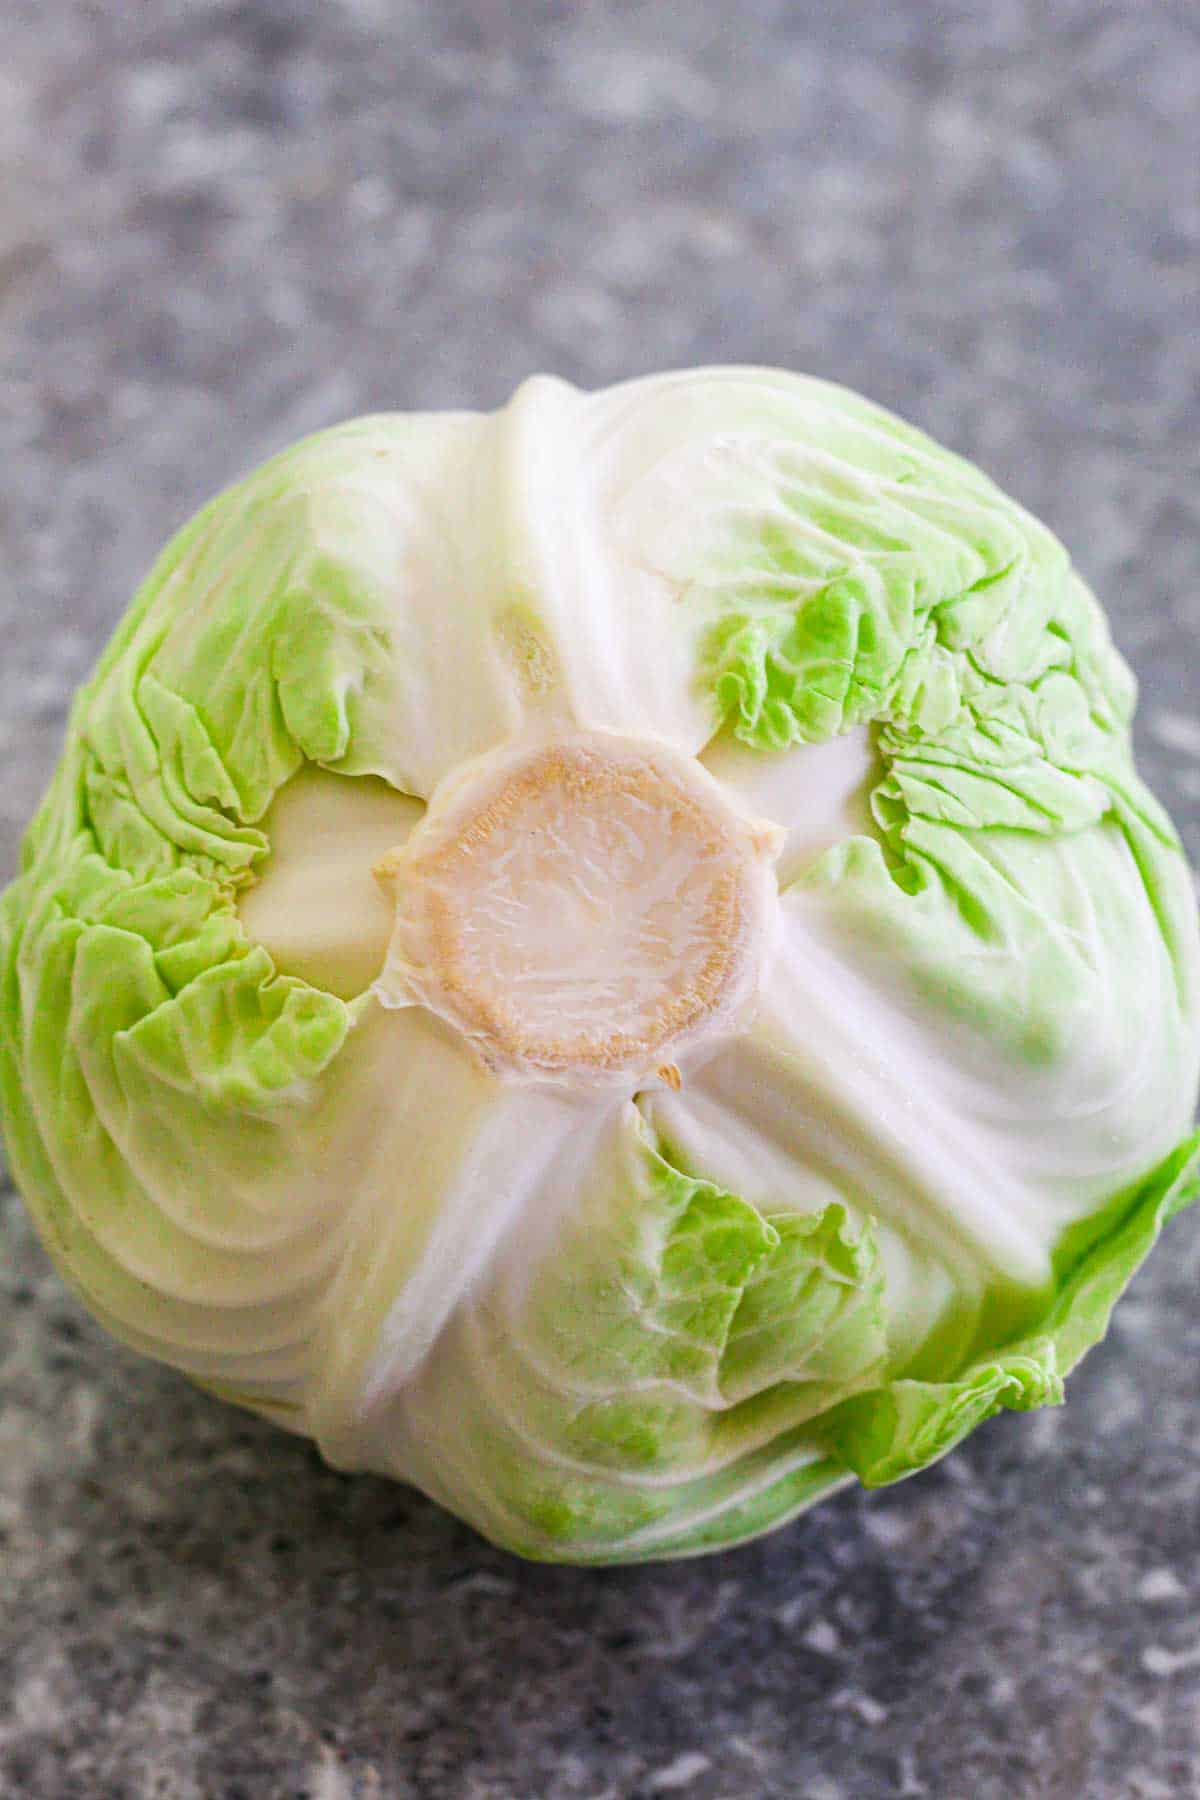 Cabbage head on a counter, seen from the core side.